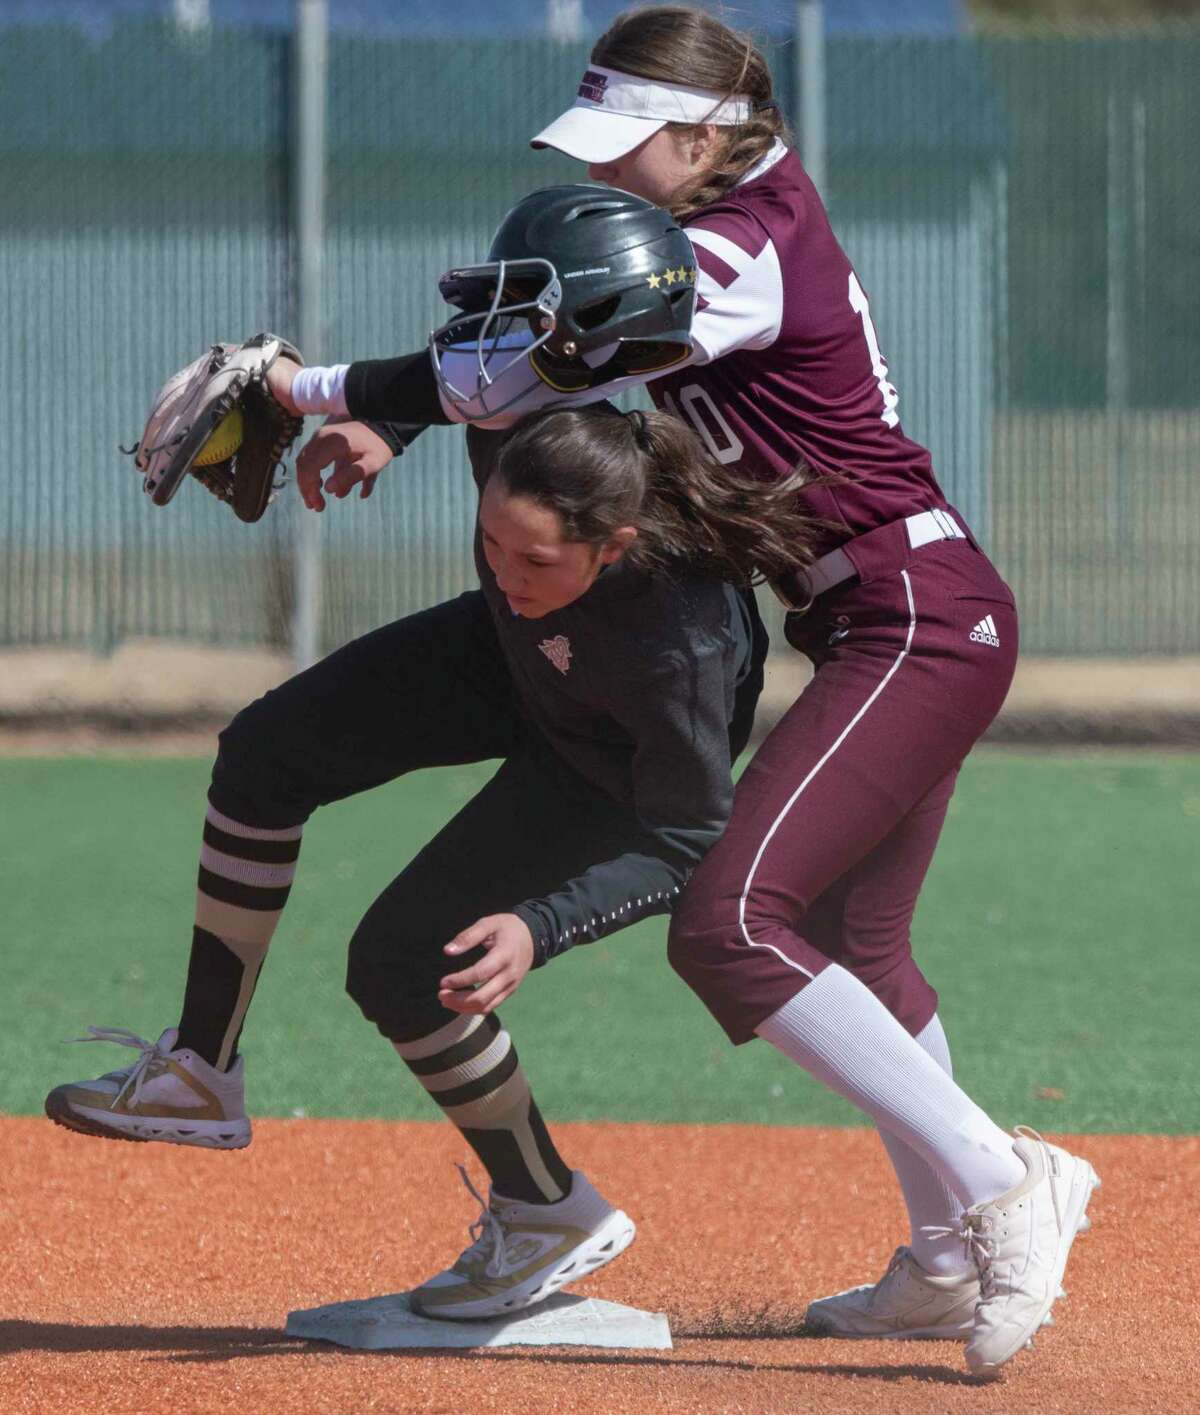 Legacy High's Taylor Martinez tries to make the tag on Amarillo's K. Lansbury but is late and knocks her helmet off in the action 02/24/2022 during play in the West Texas Classic at Ulmer Park. Tim Fischer/Reporter-Telegram